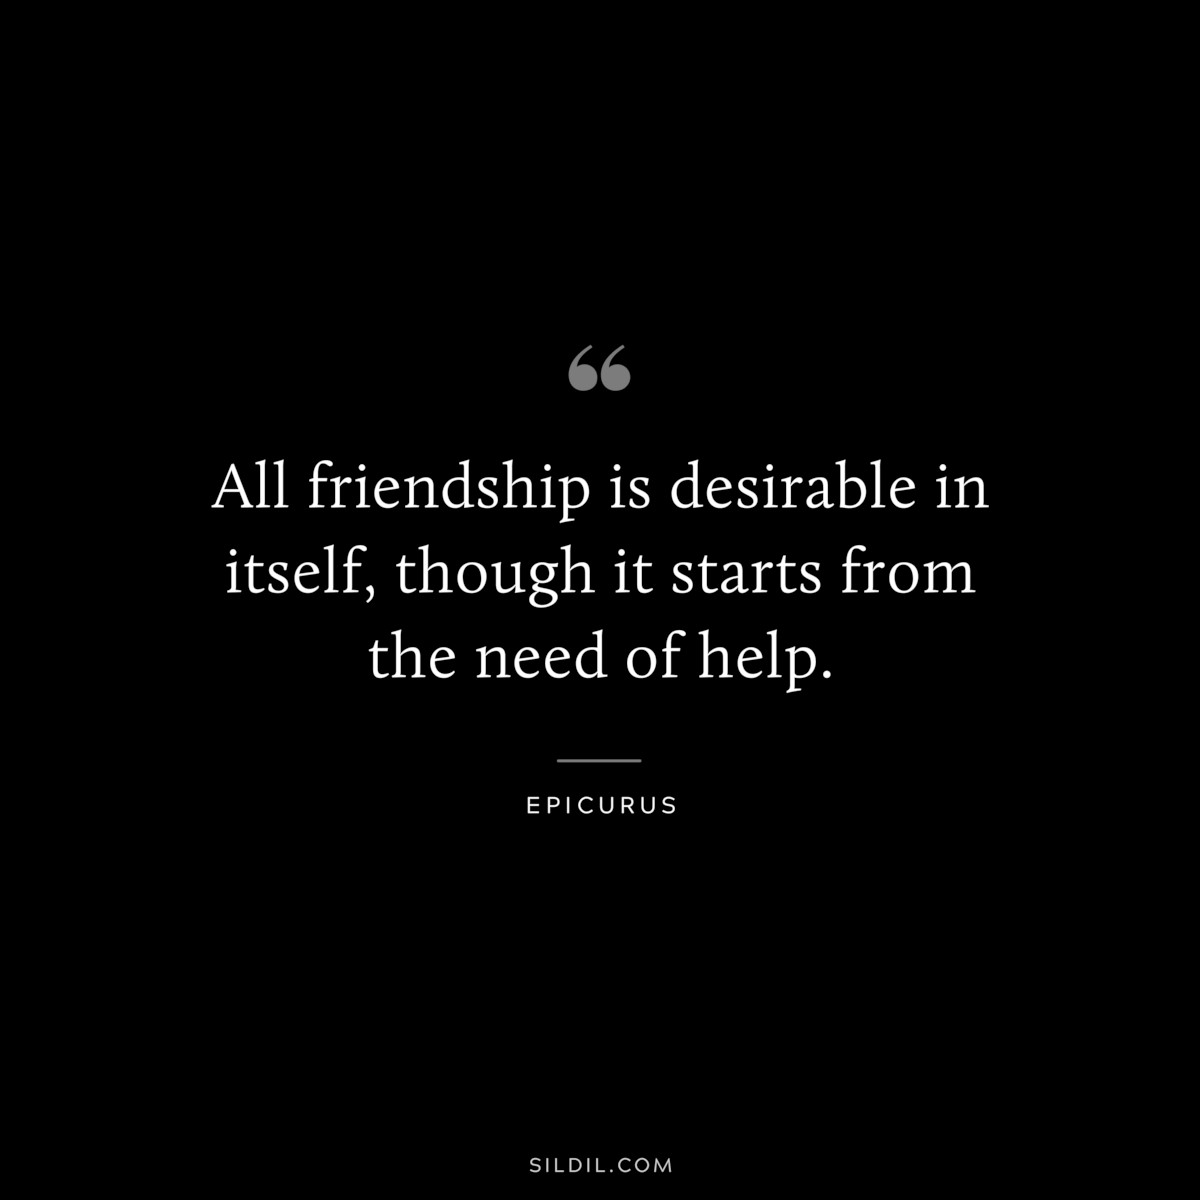 All friendship is desirable in itself, though it starts from the need of help. — Epicurus